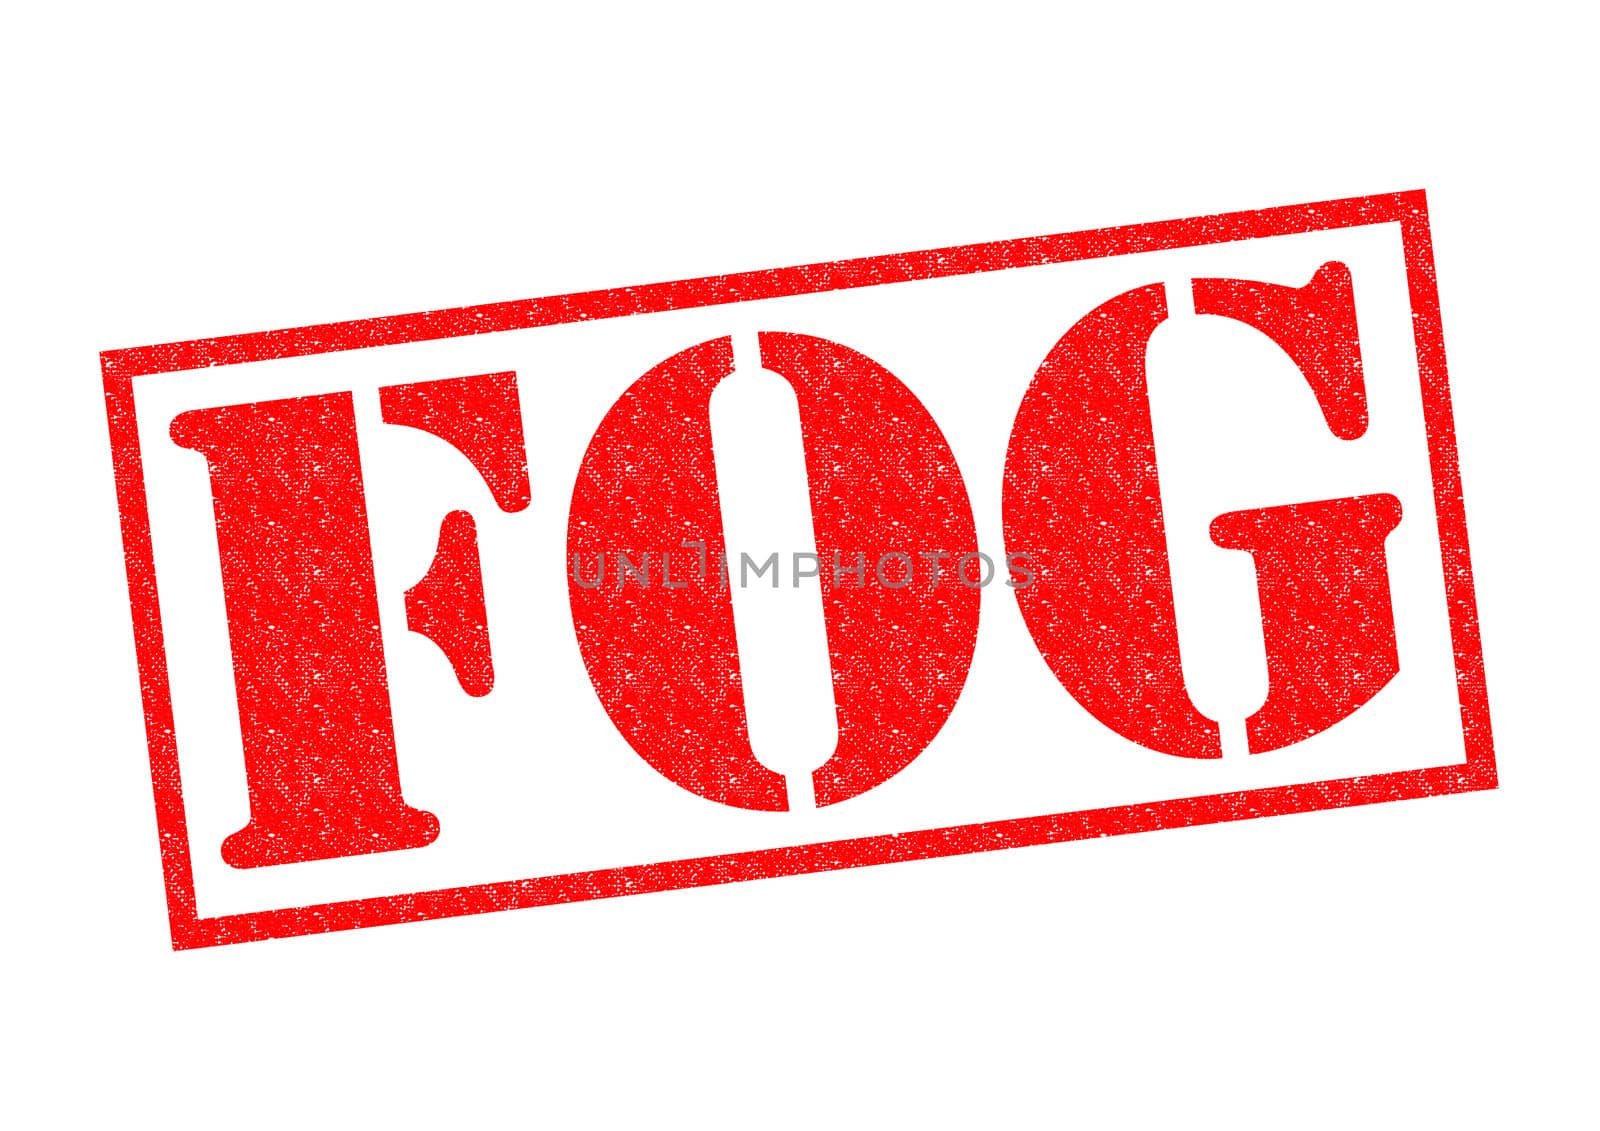 FOG red Rubber Stamp over a white background.